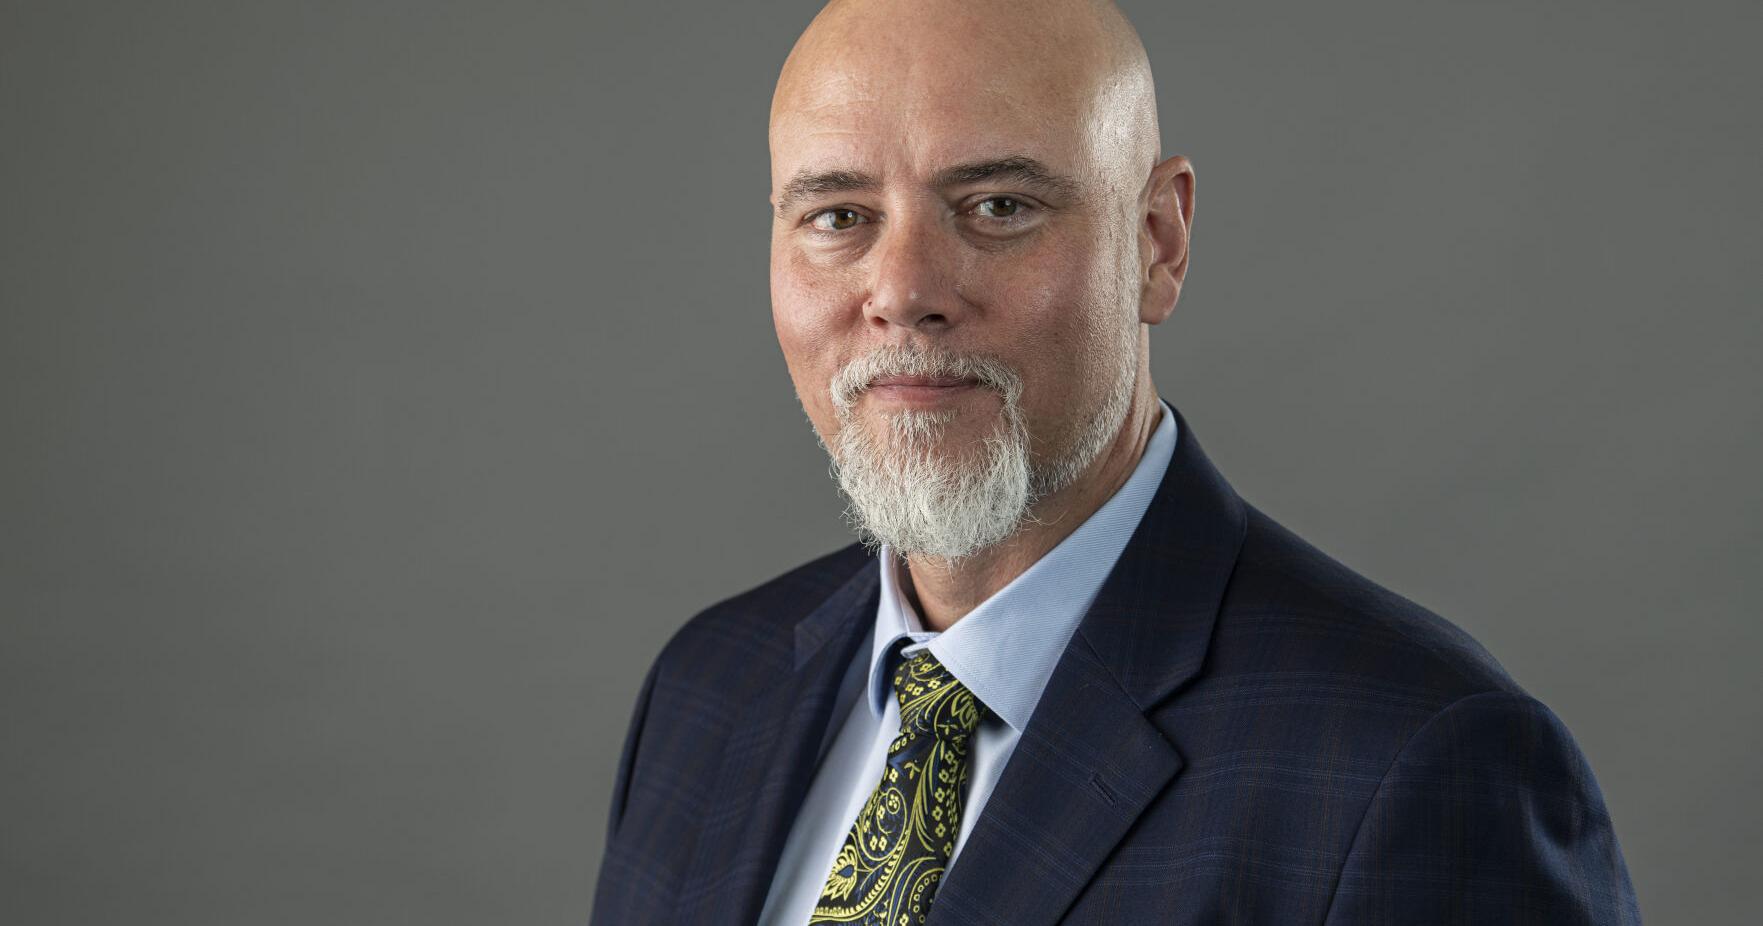 Missouri S&T Alumnus Named Vice Provost, Dean of the College of Engineering and Computing